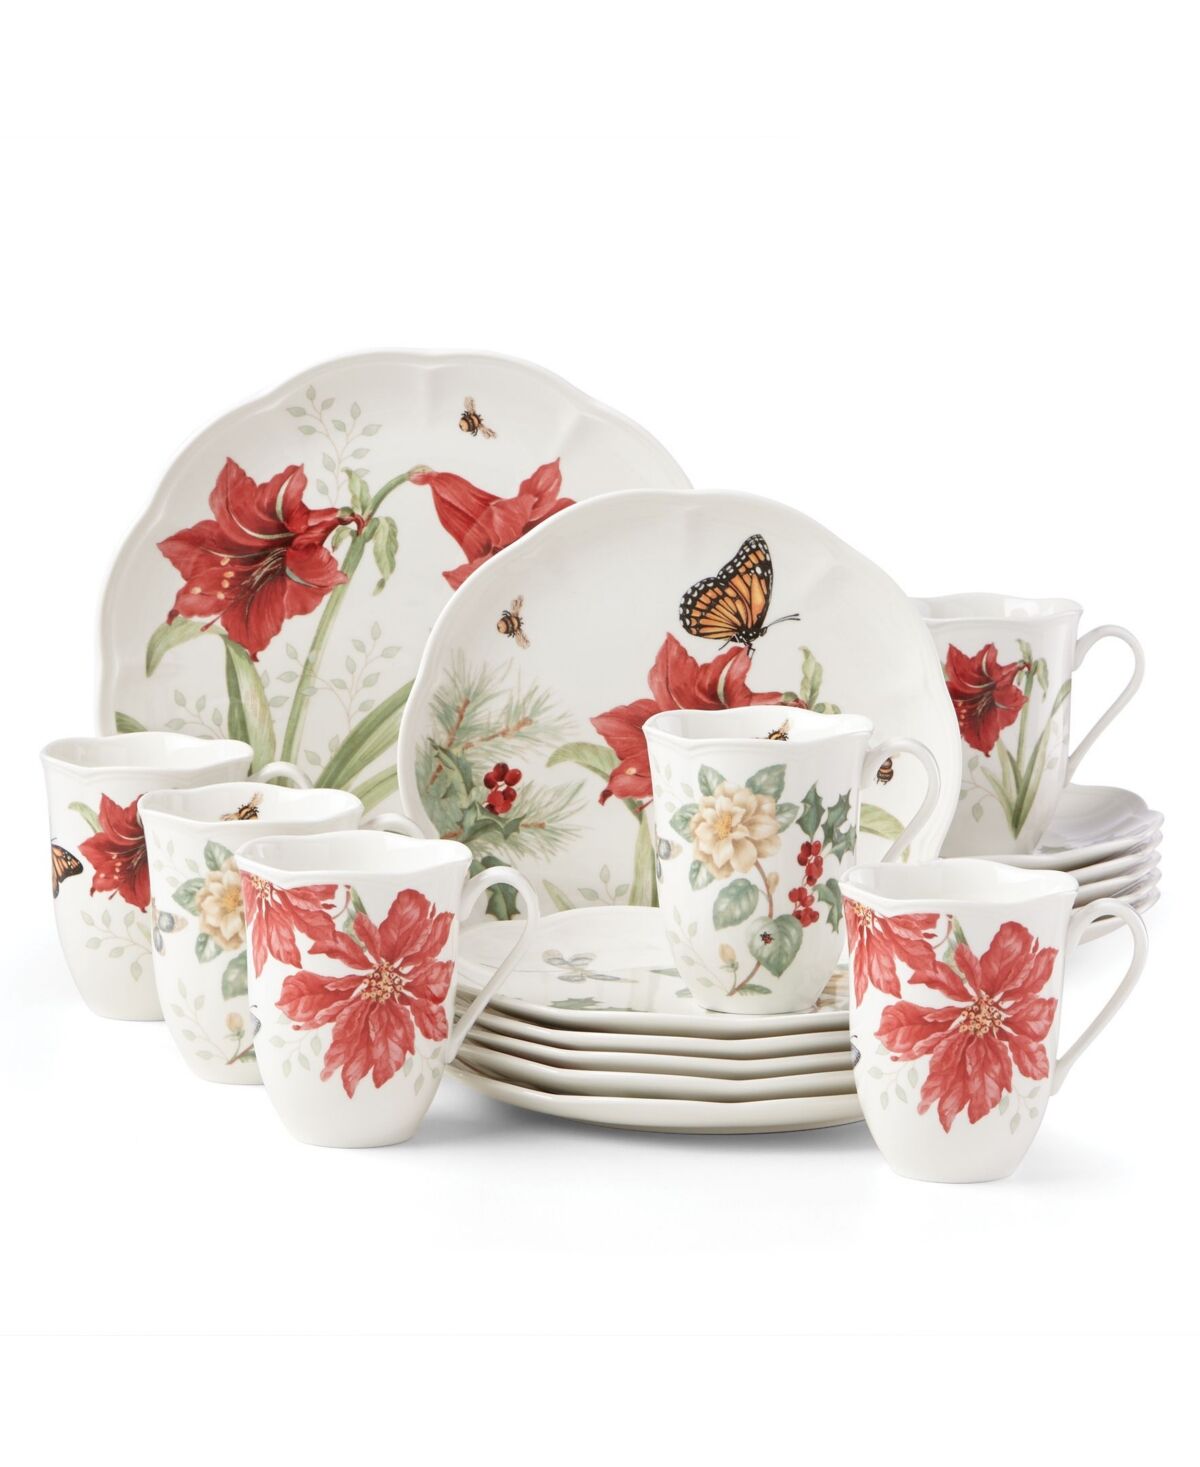 Lenox Butterfly Meadow Holiday 18-pc Dinnerware Set, Service for 6 - White Background With Multi-color Season